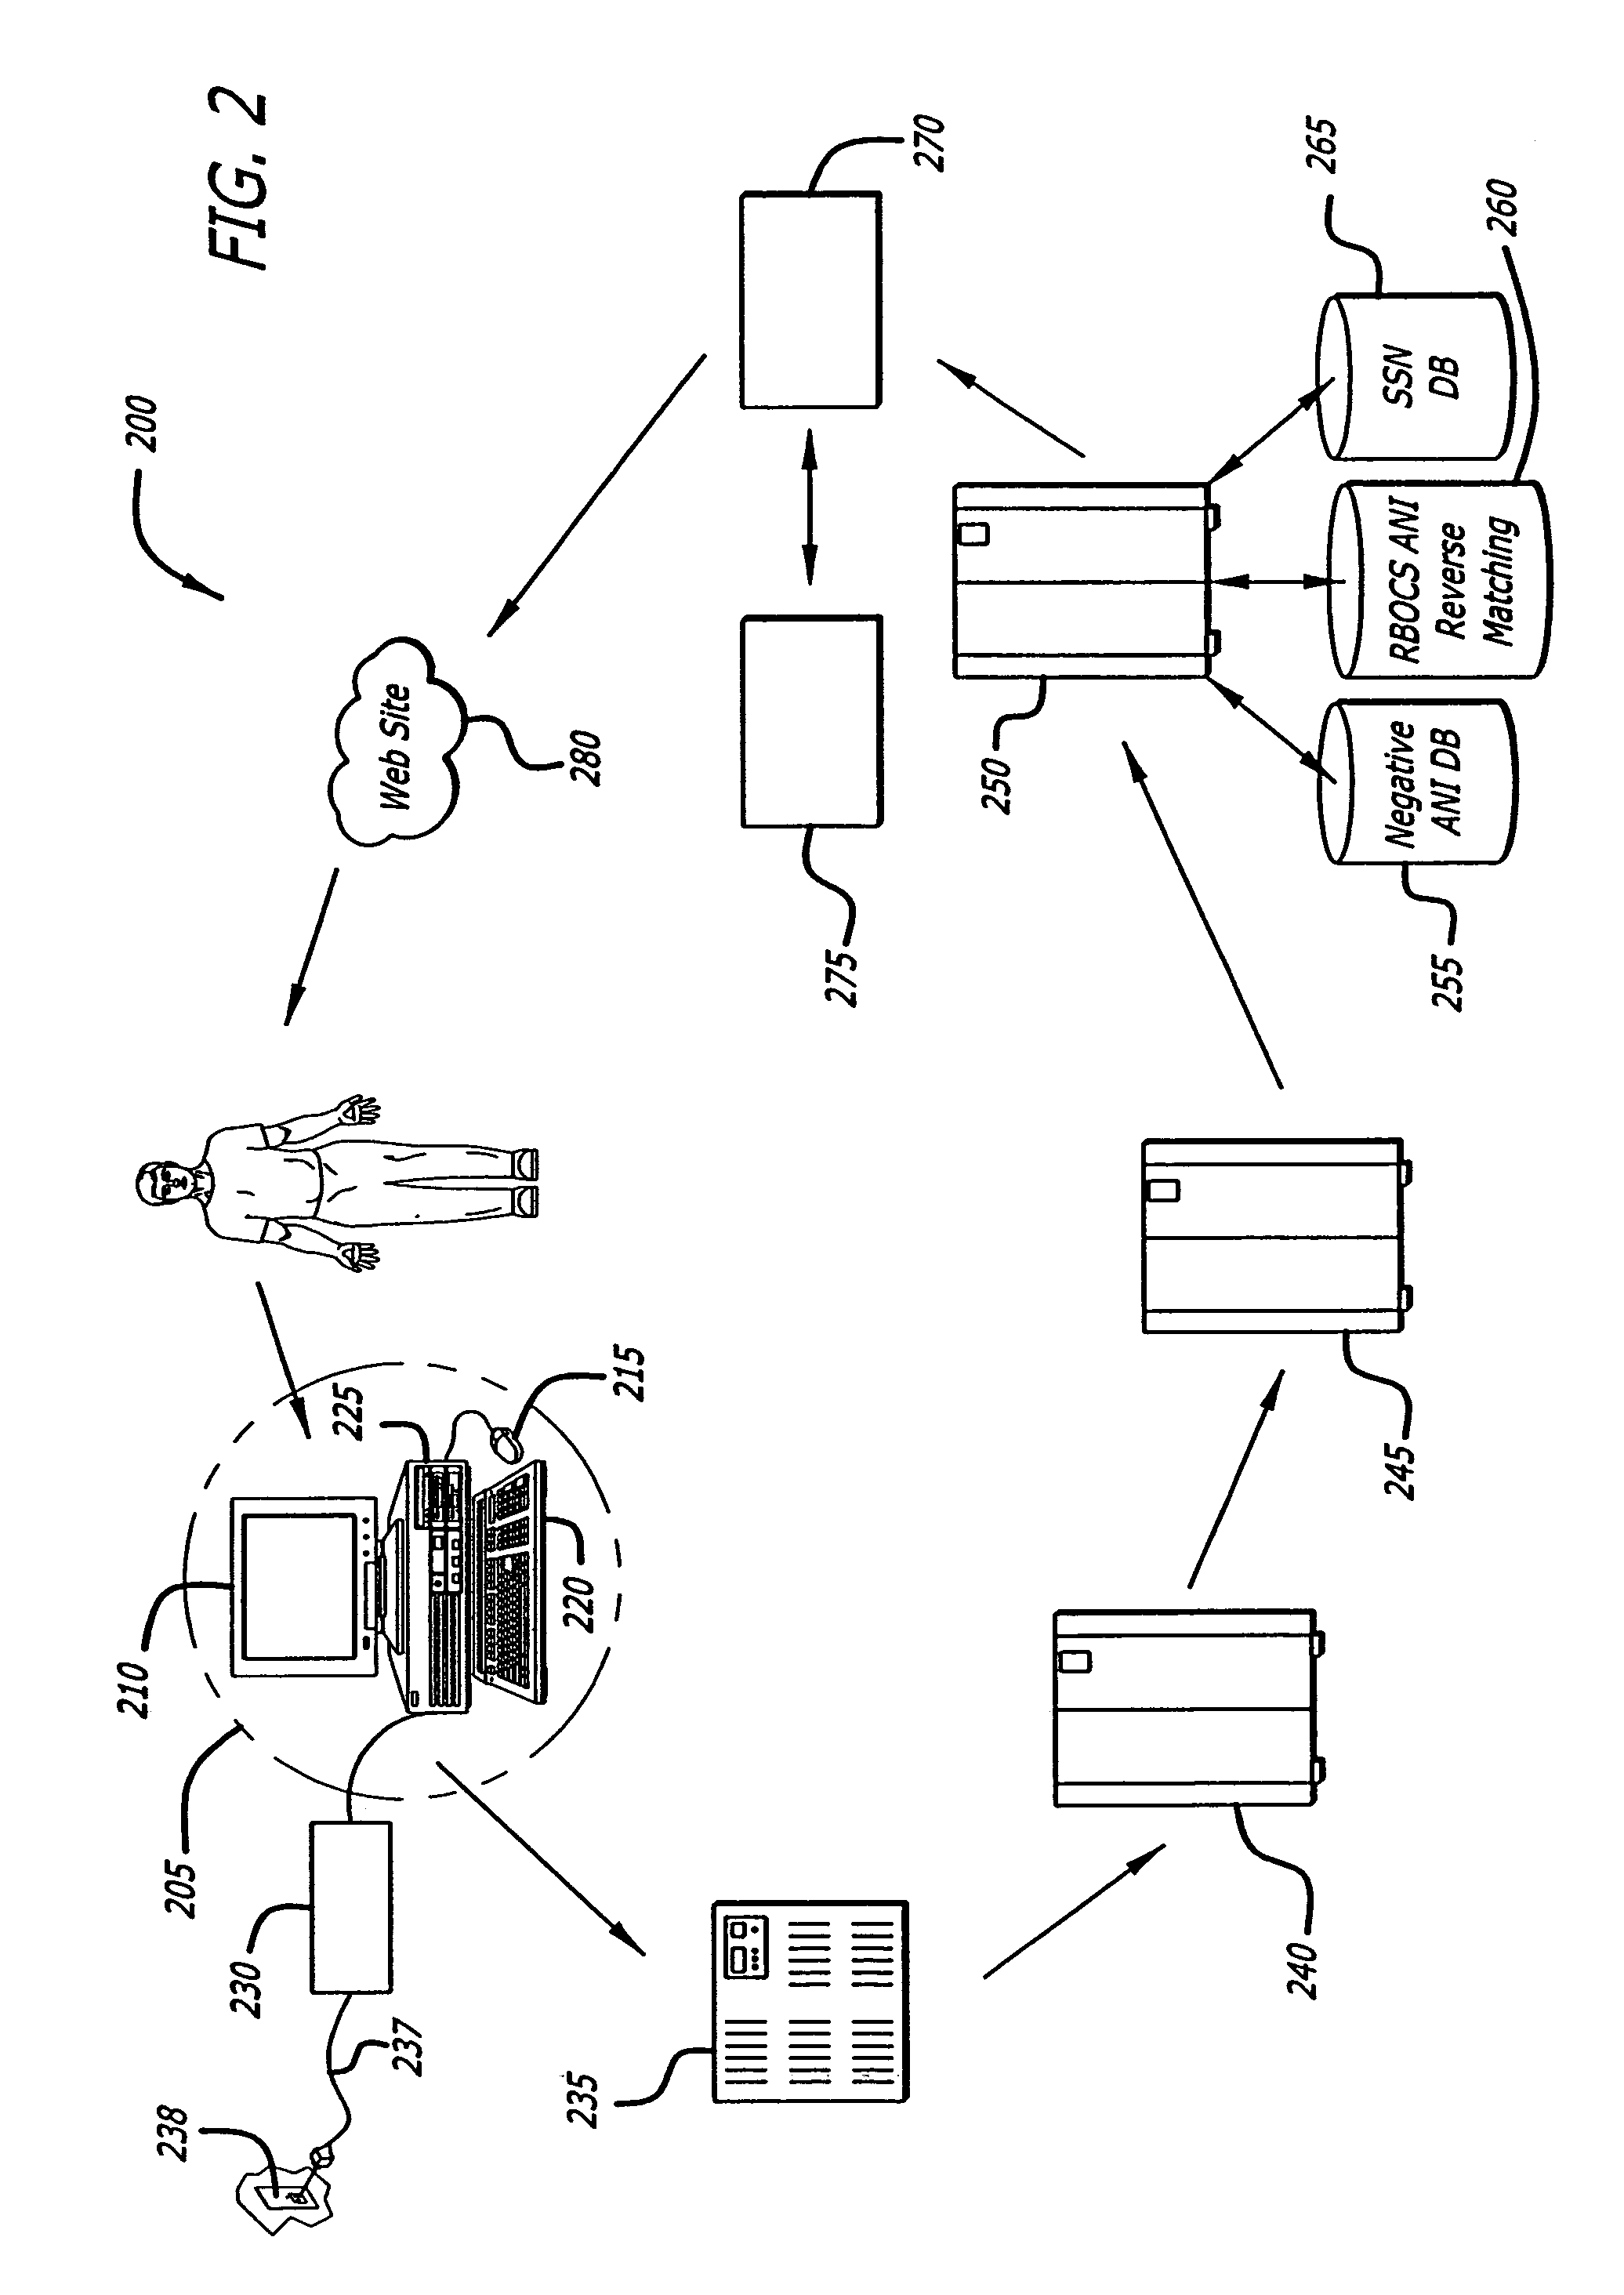 Computer-implemented method and system for managing accounting and billing of transactions over public media such as the internet